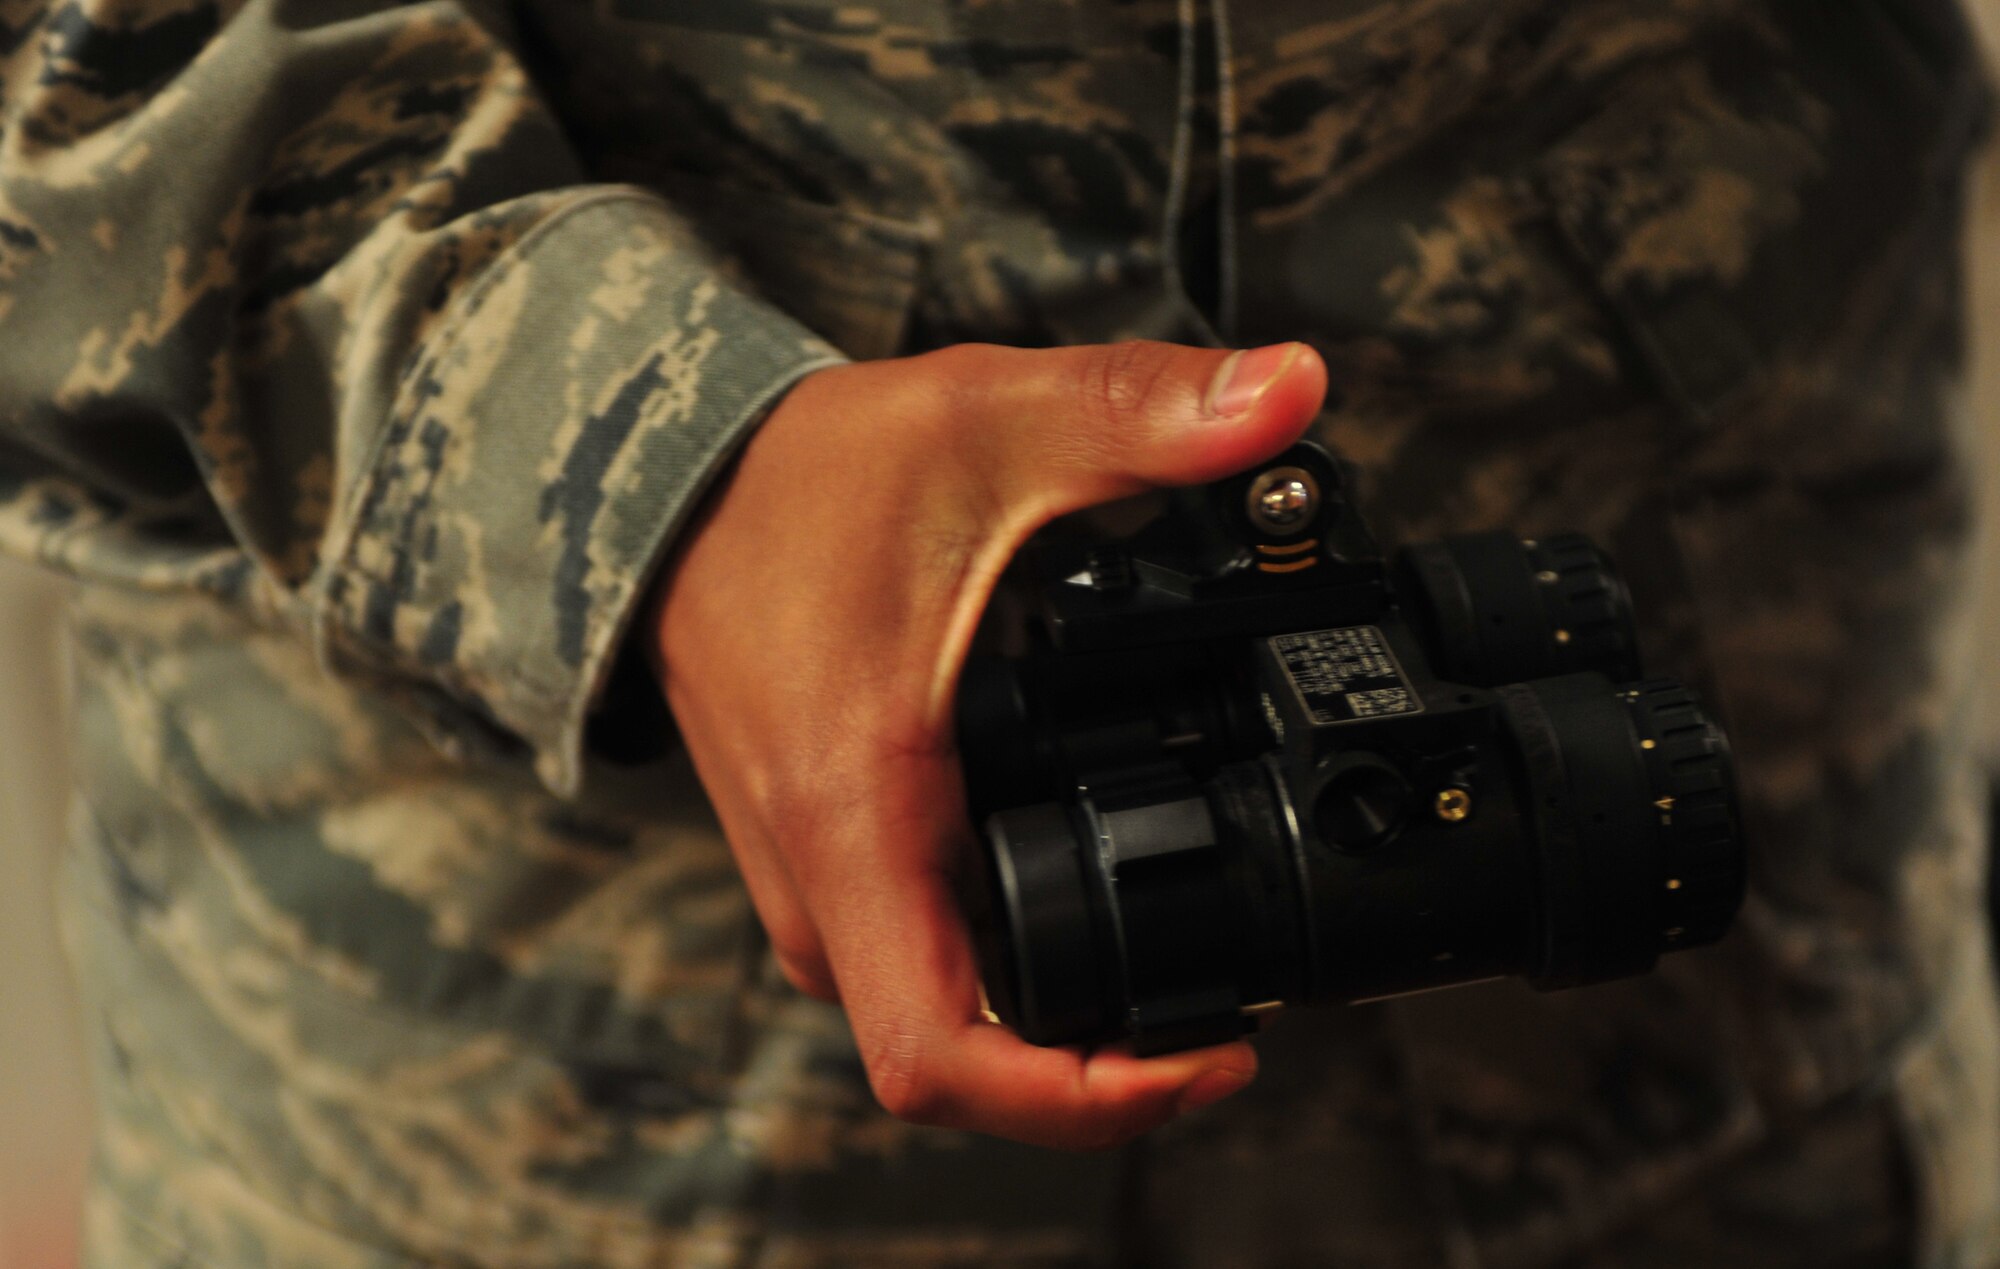 U.S. Airman 1st Class Andrew Mesa, 23d Operations Support Squadron aircrew flight equipment technician, inspects night vision goggles for an A-10C Thunderbolt II pilot from the 74th Fighter Squadron from Moody Air Force Base, Ga., during Red Flag 12-4 at Nellis AFB, Nev., July 23, 2012. After a pilot returns from a mission the AFE technicians perform a post-flight inspection on the pilots equipment. (U.S. Air Force photo by Staff Sgt. Stephanie Mancha/Released)